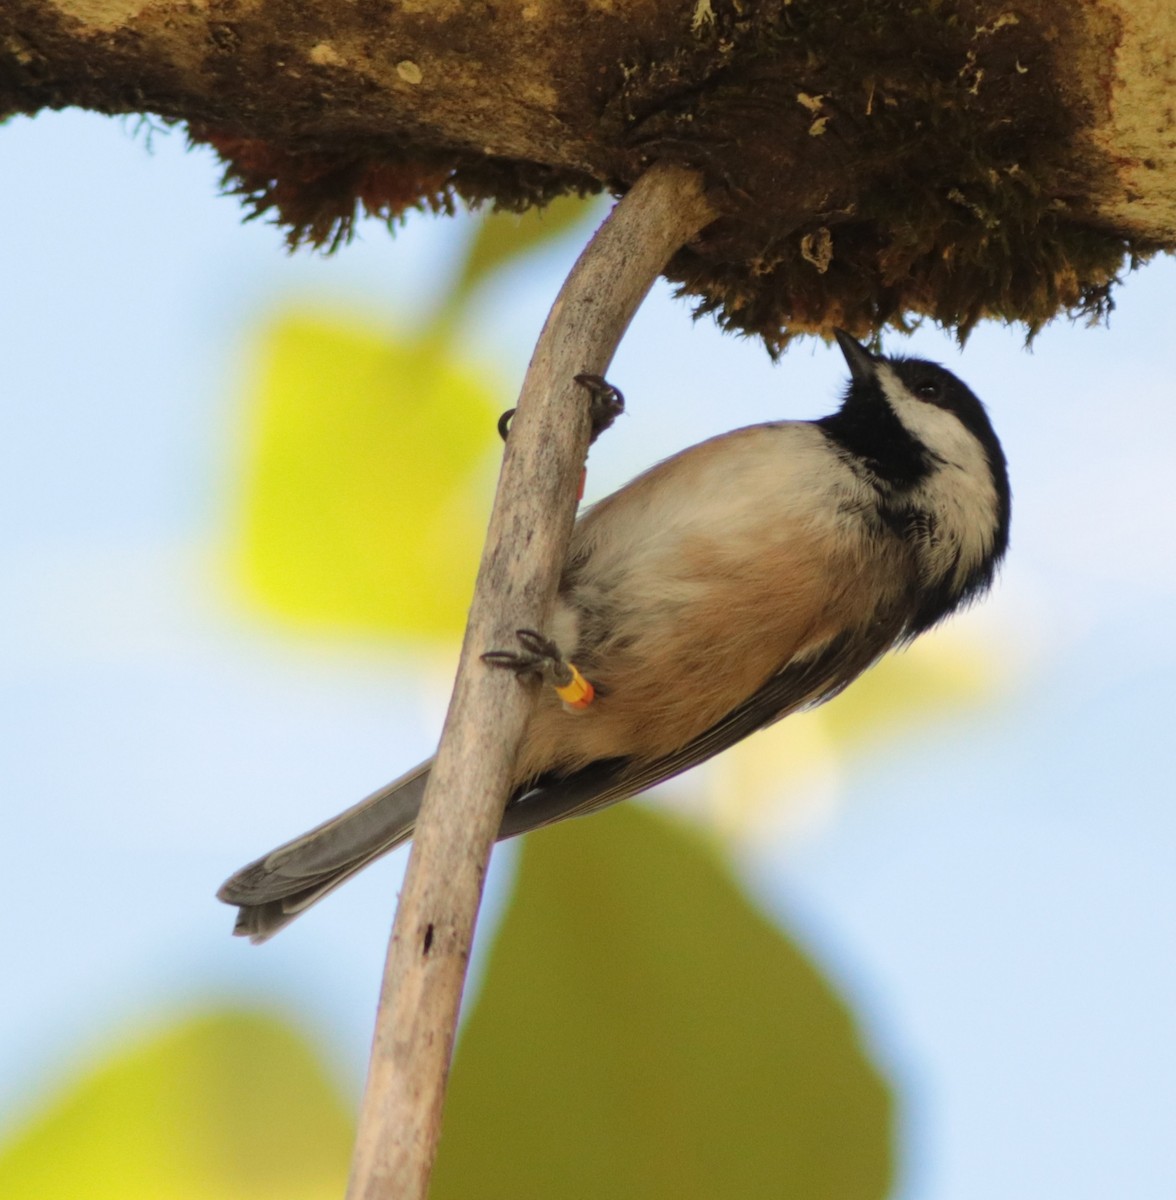 Black-capped Chickadee - Daphne Asbell